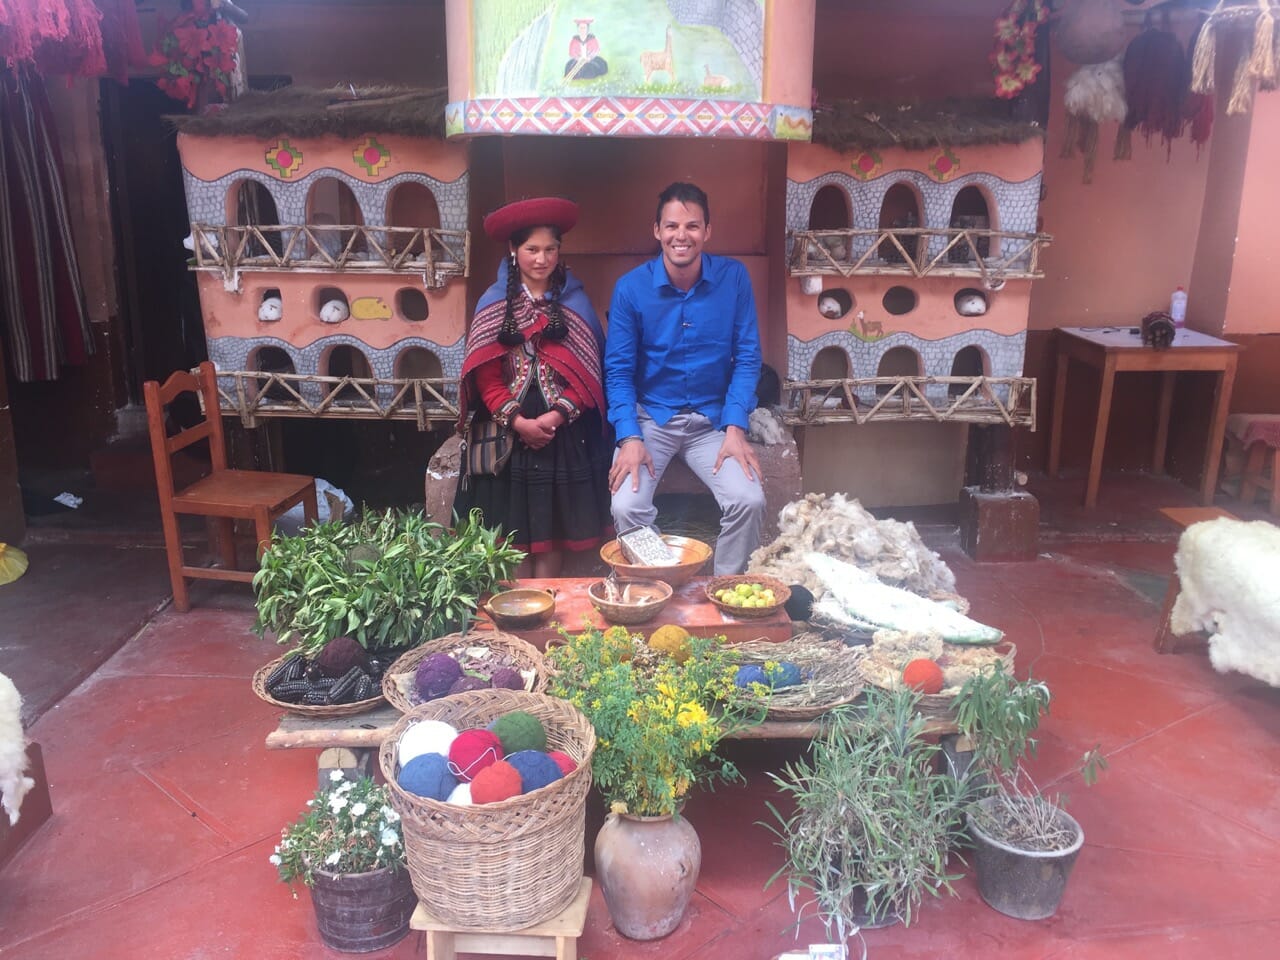 A local Peruvian lady wearing traditional clothes and Pericles Rosa at a weaving workshop in Chinchero, Peru, with  some plants, flowers, cactus, wool, baskets with wool tubes, and bowls with lime, leaves, maize and a tubercle that are used to dye alpacas